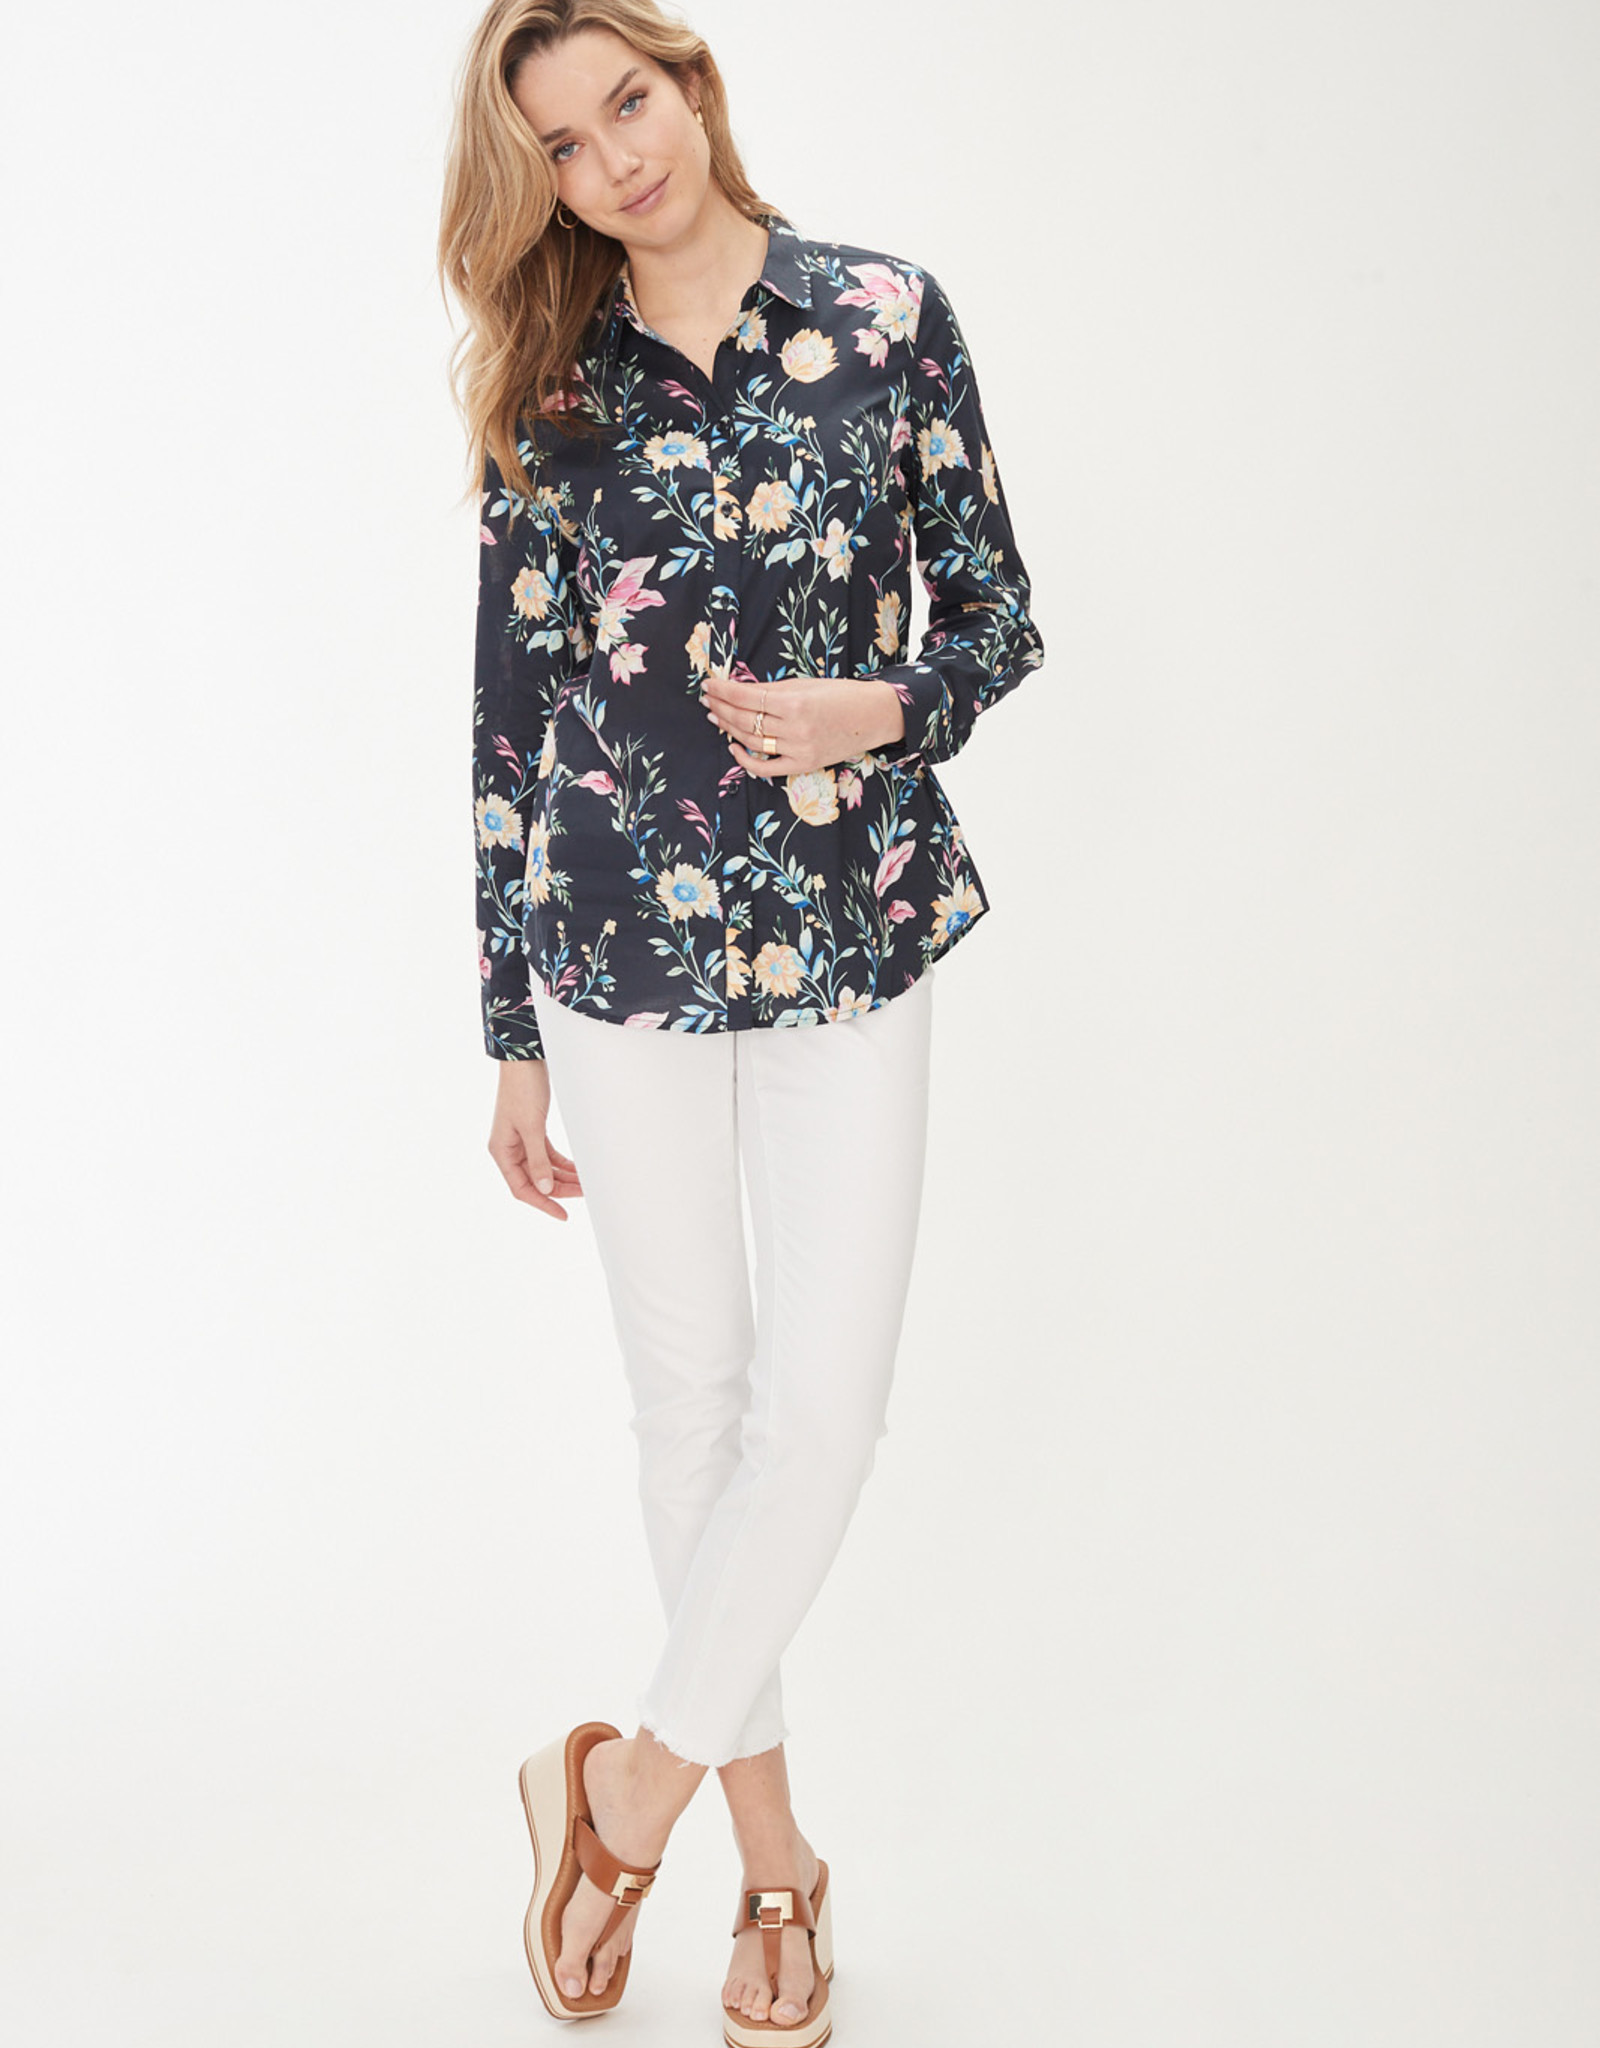 French Dressing Jeans FDJ 1472623 Classic Long Sleeve Button Down Top with Sunflower Print